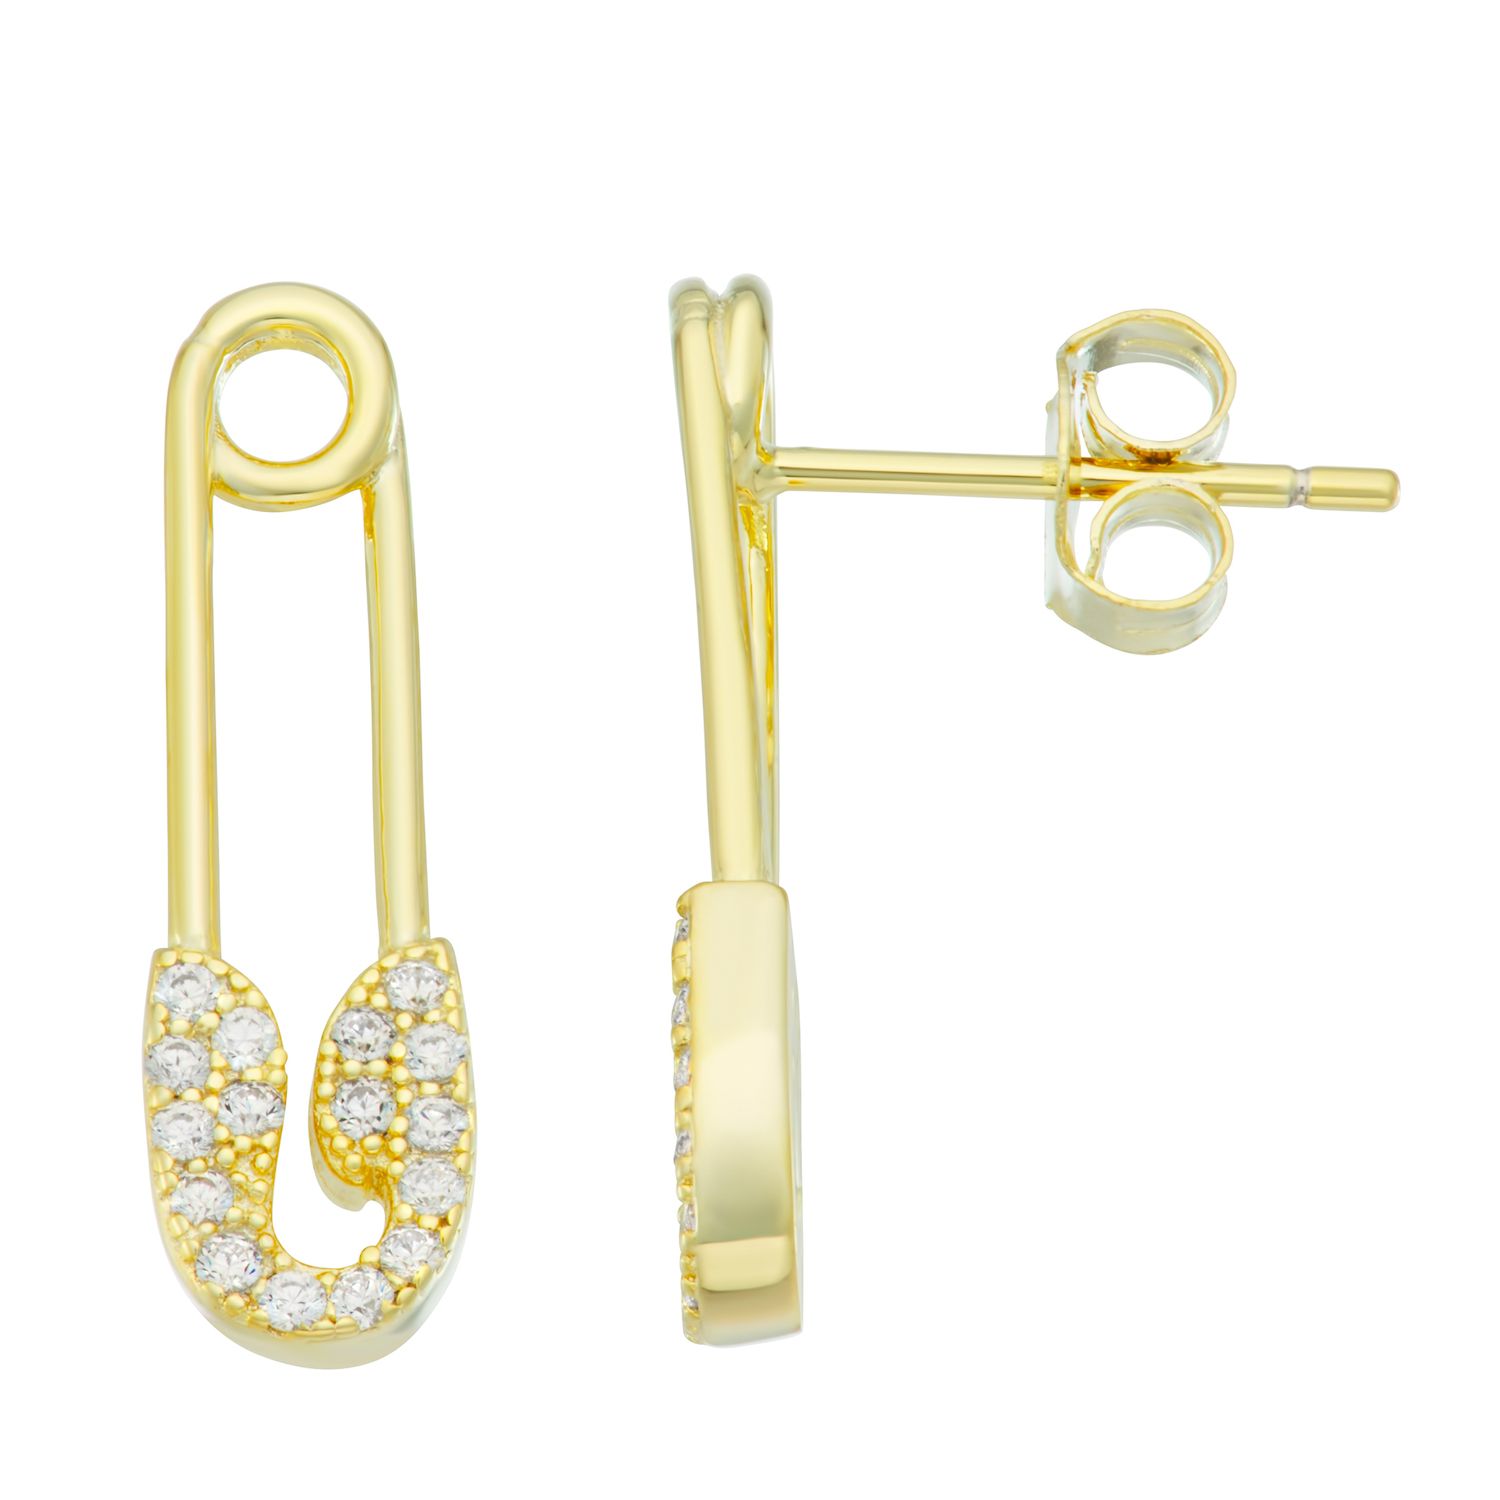 Gold Safety pin Supply Charm sparkly safety pins/ needle earring